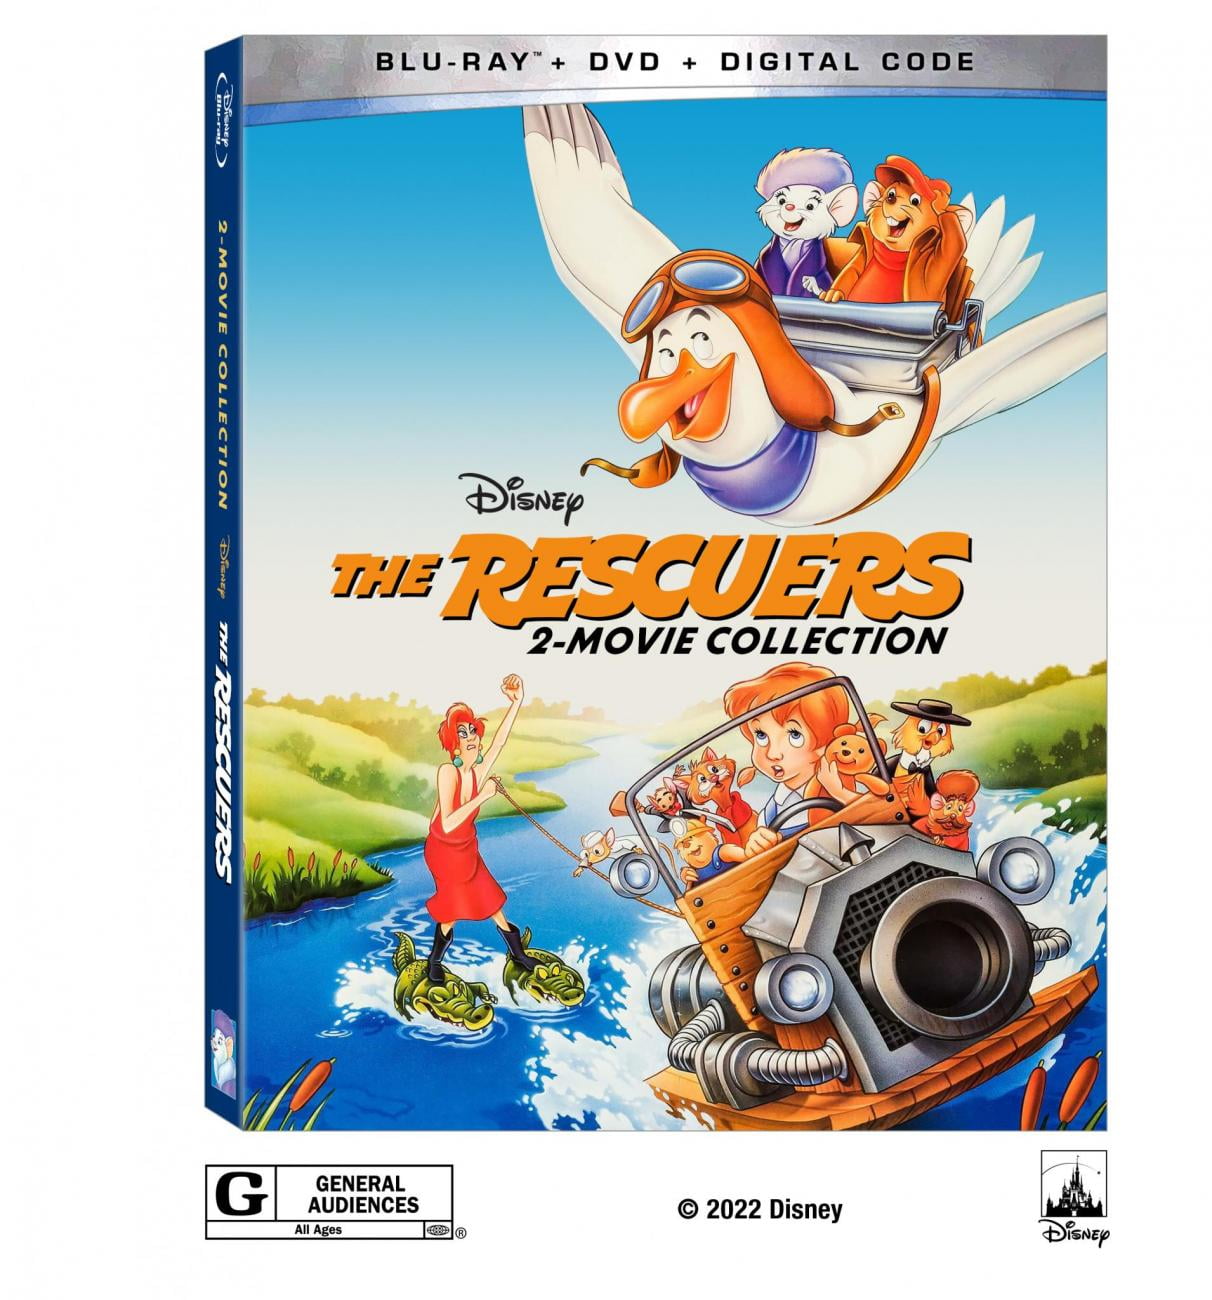 The Rescuer's 2-Movie Collection (Blu-ray + DVD + Digital Code)